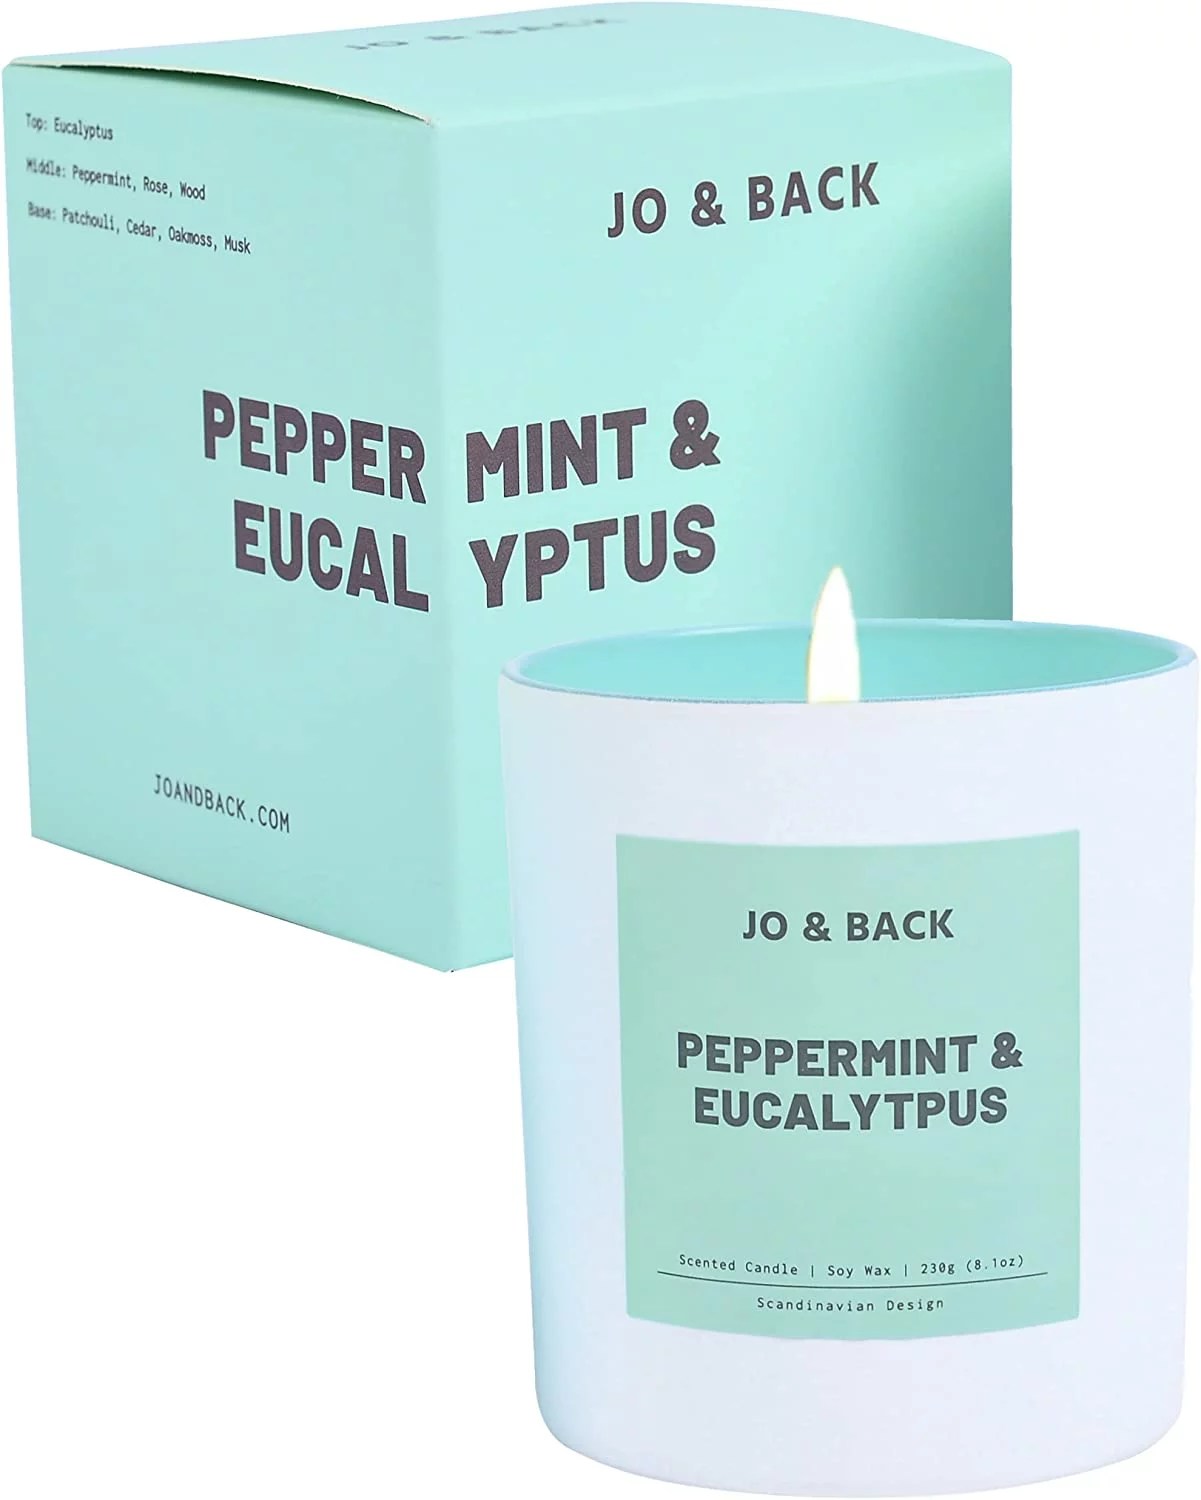 jo and back peppermint candle and box